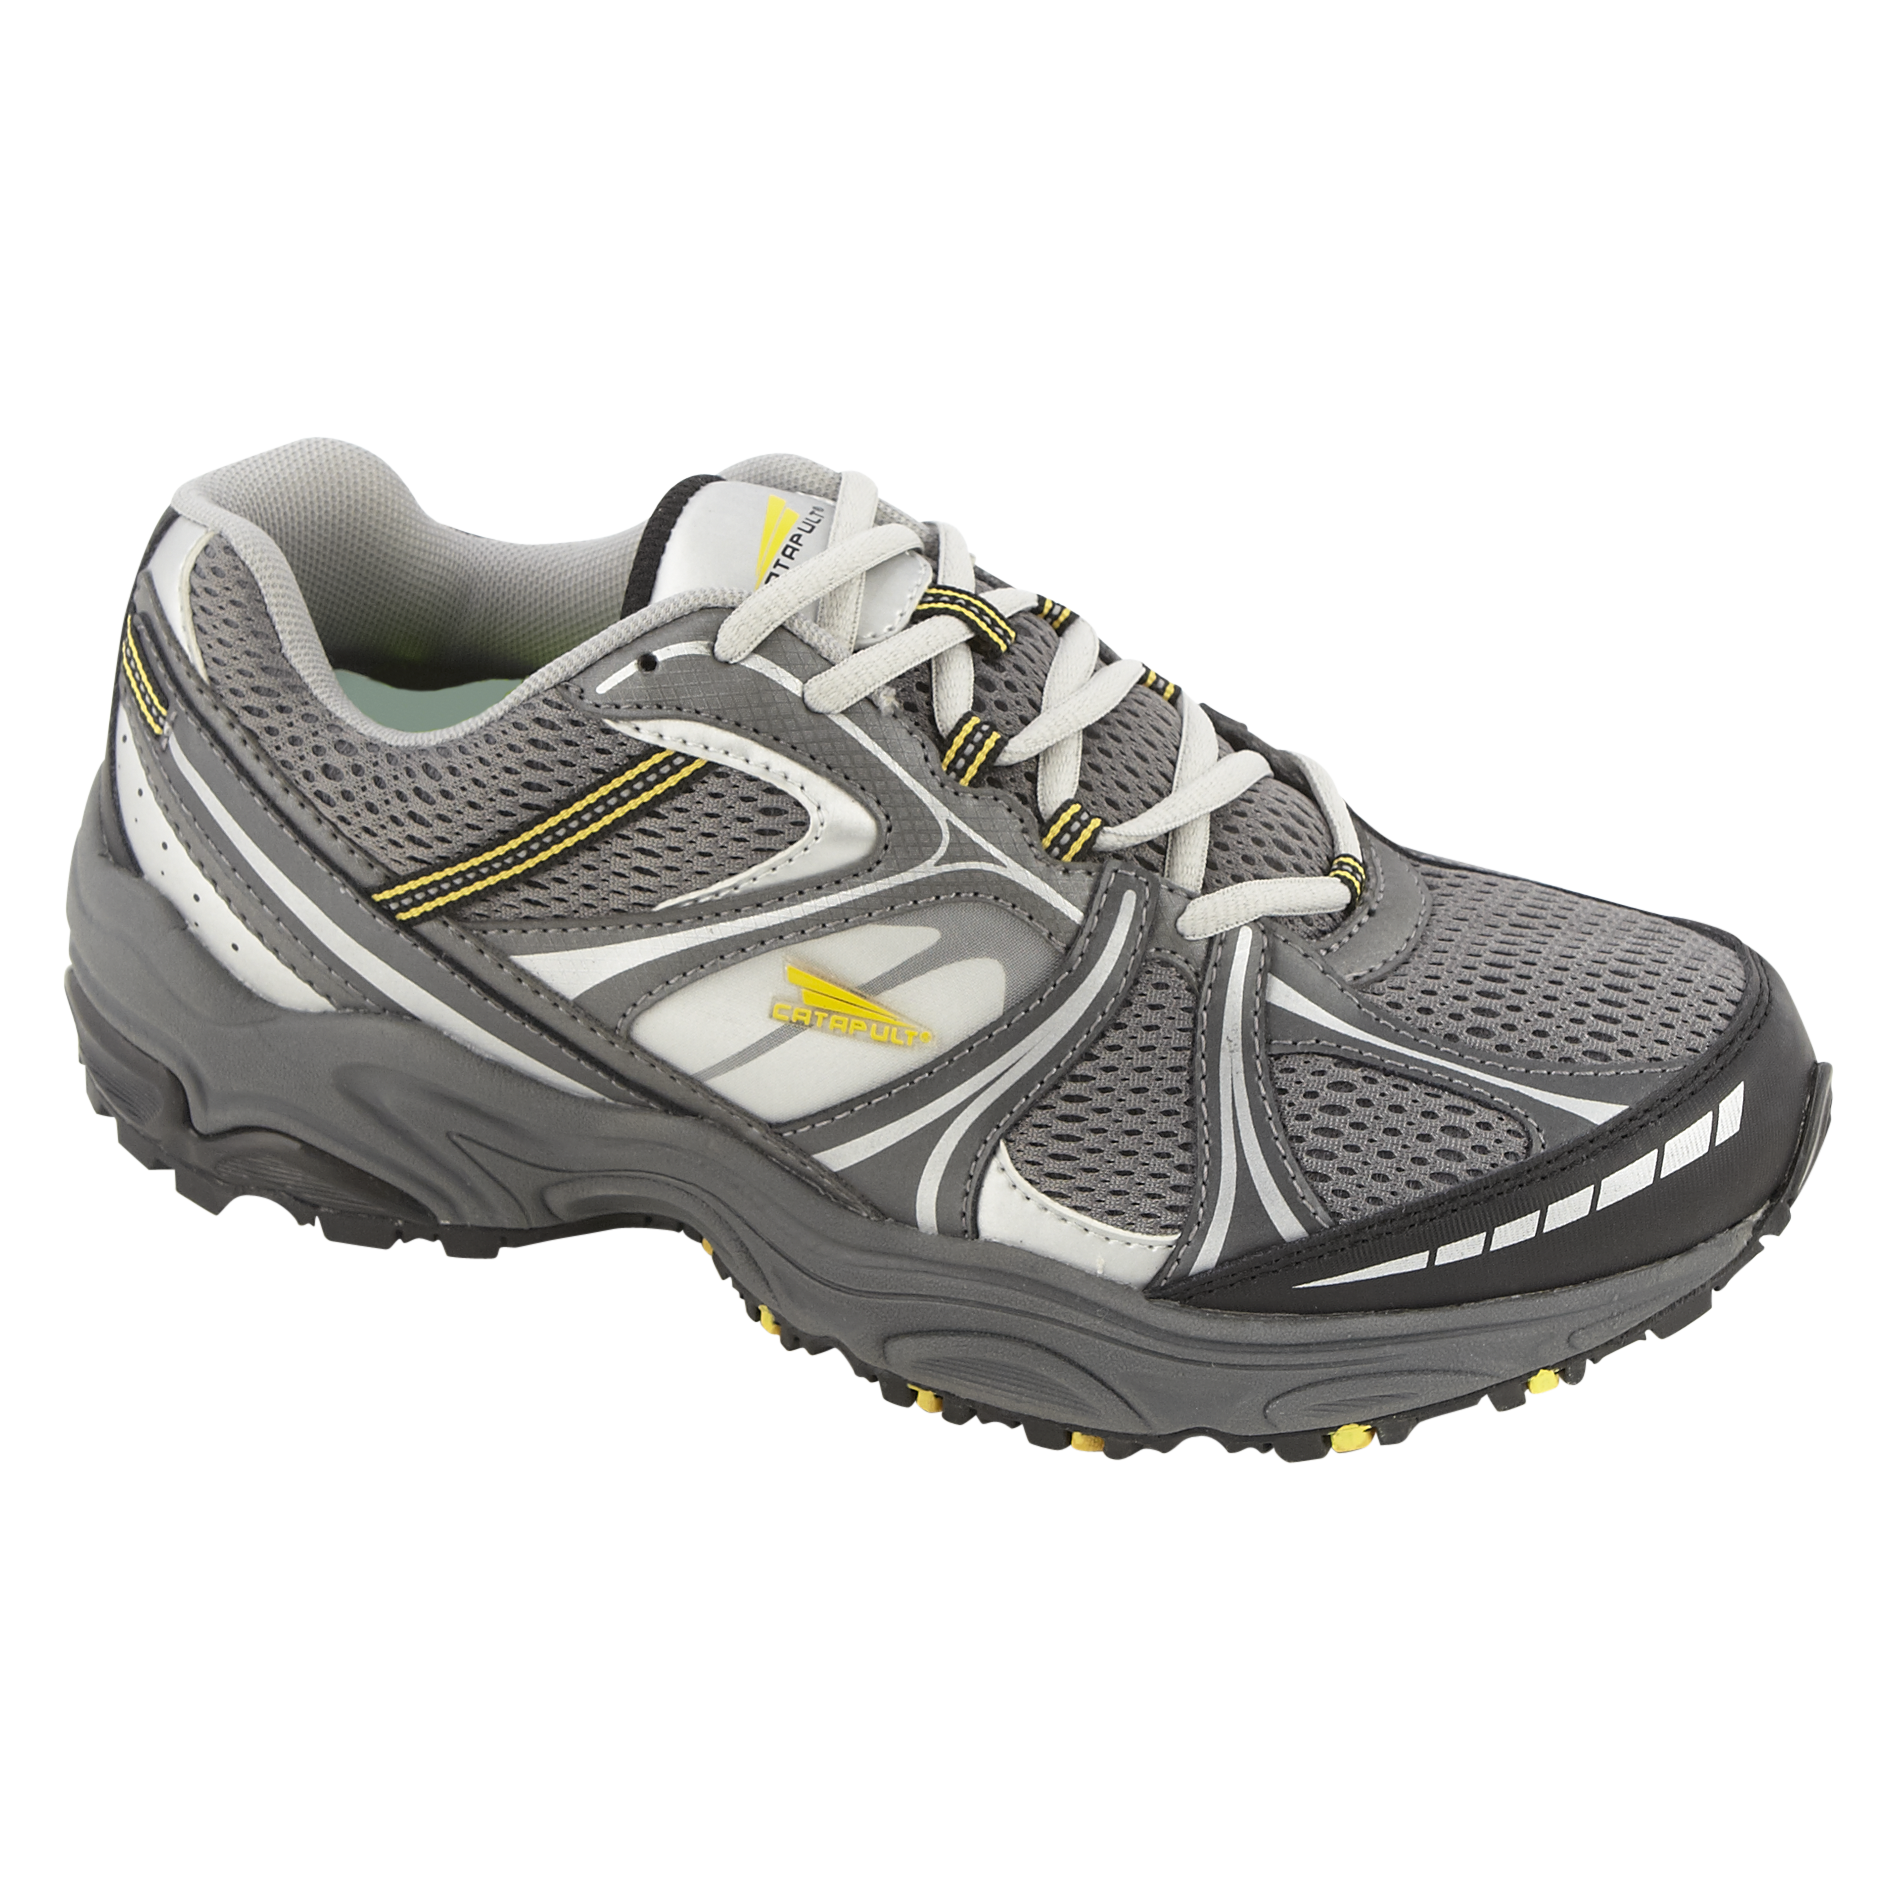 CATAPULT Men's Puck Trail Running Athletic Shoe - Charcoal/Navy